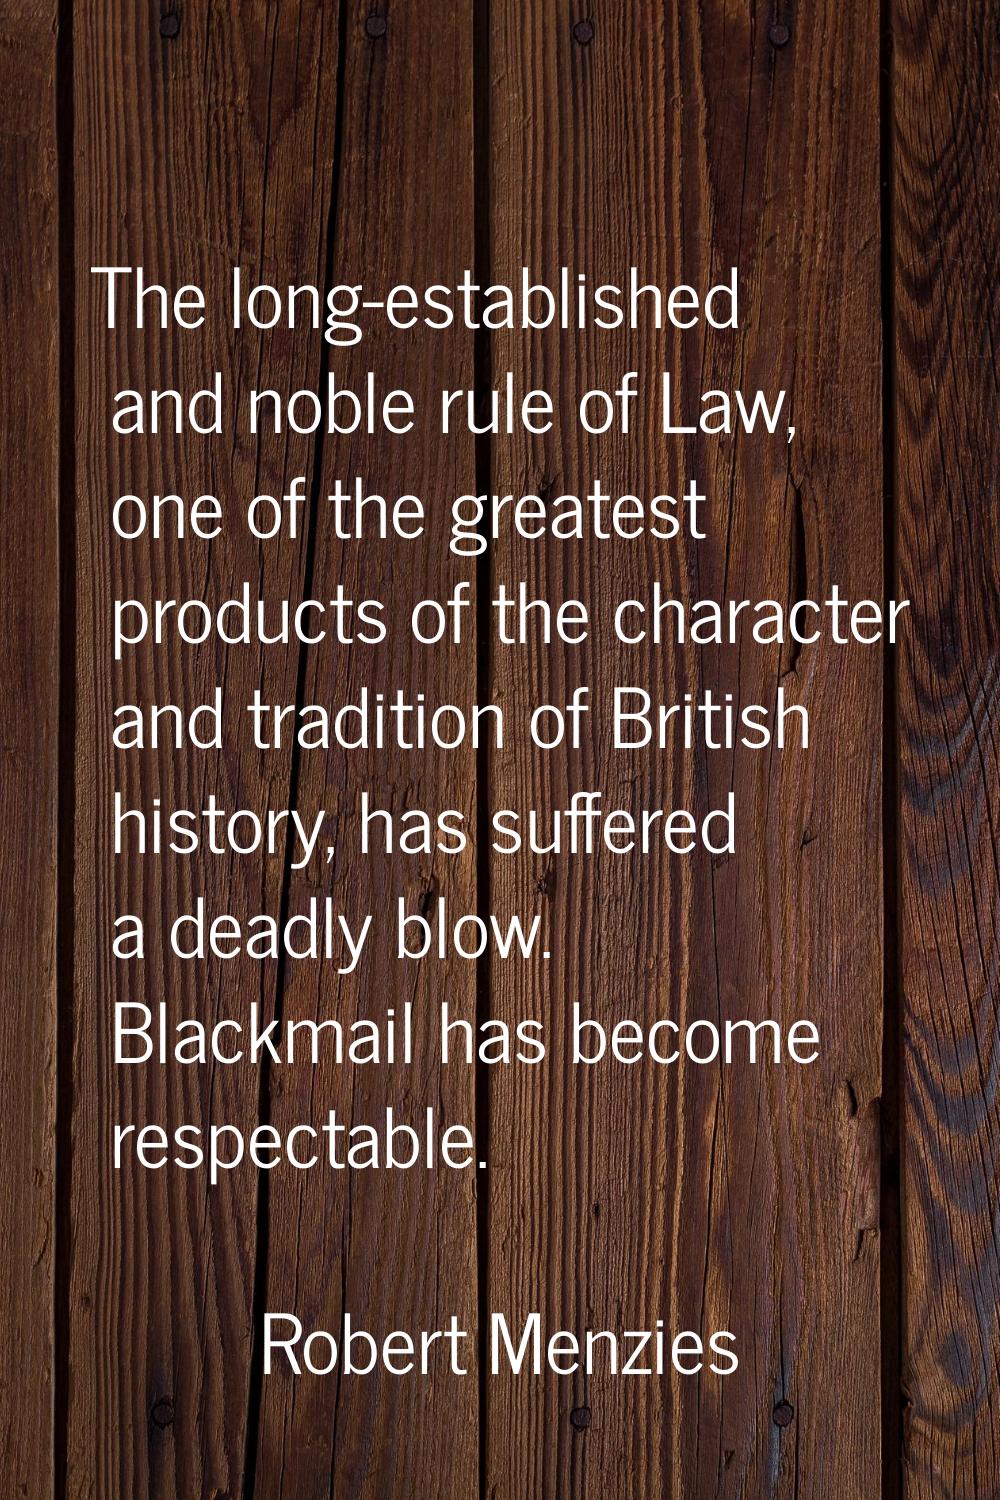 The long-established and noble rule of Law, one of the greatest products of the character and tradi